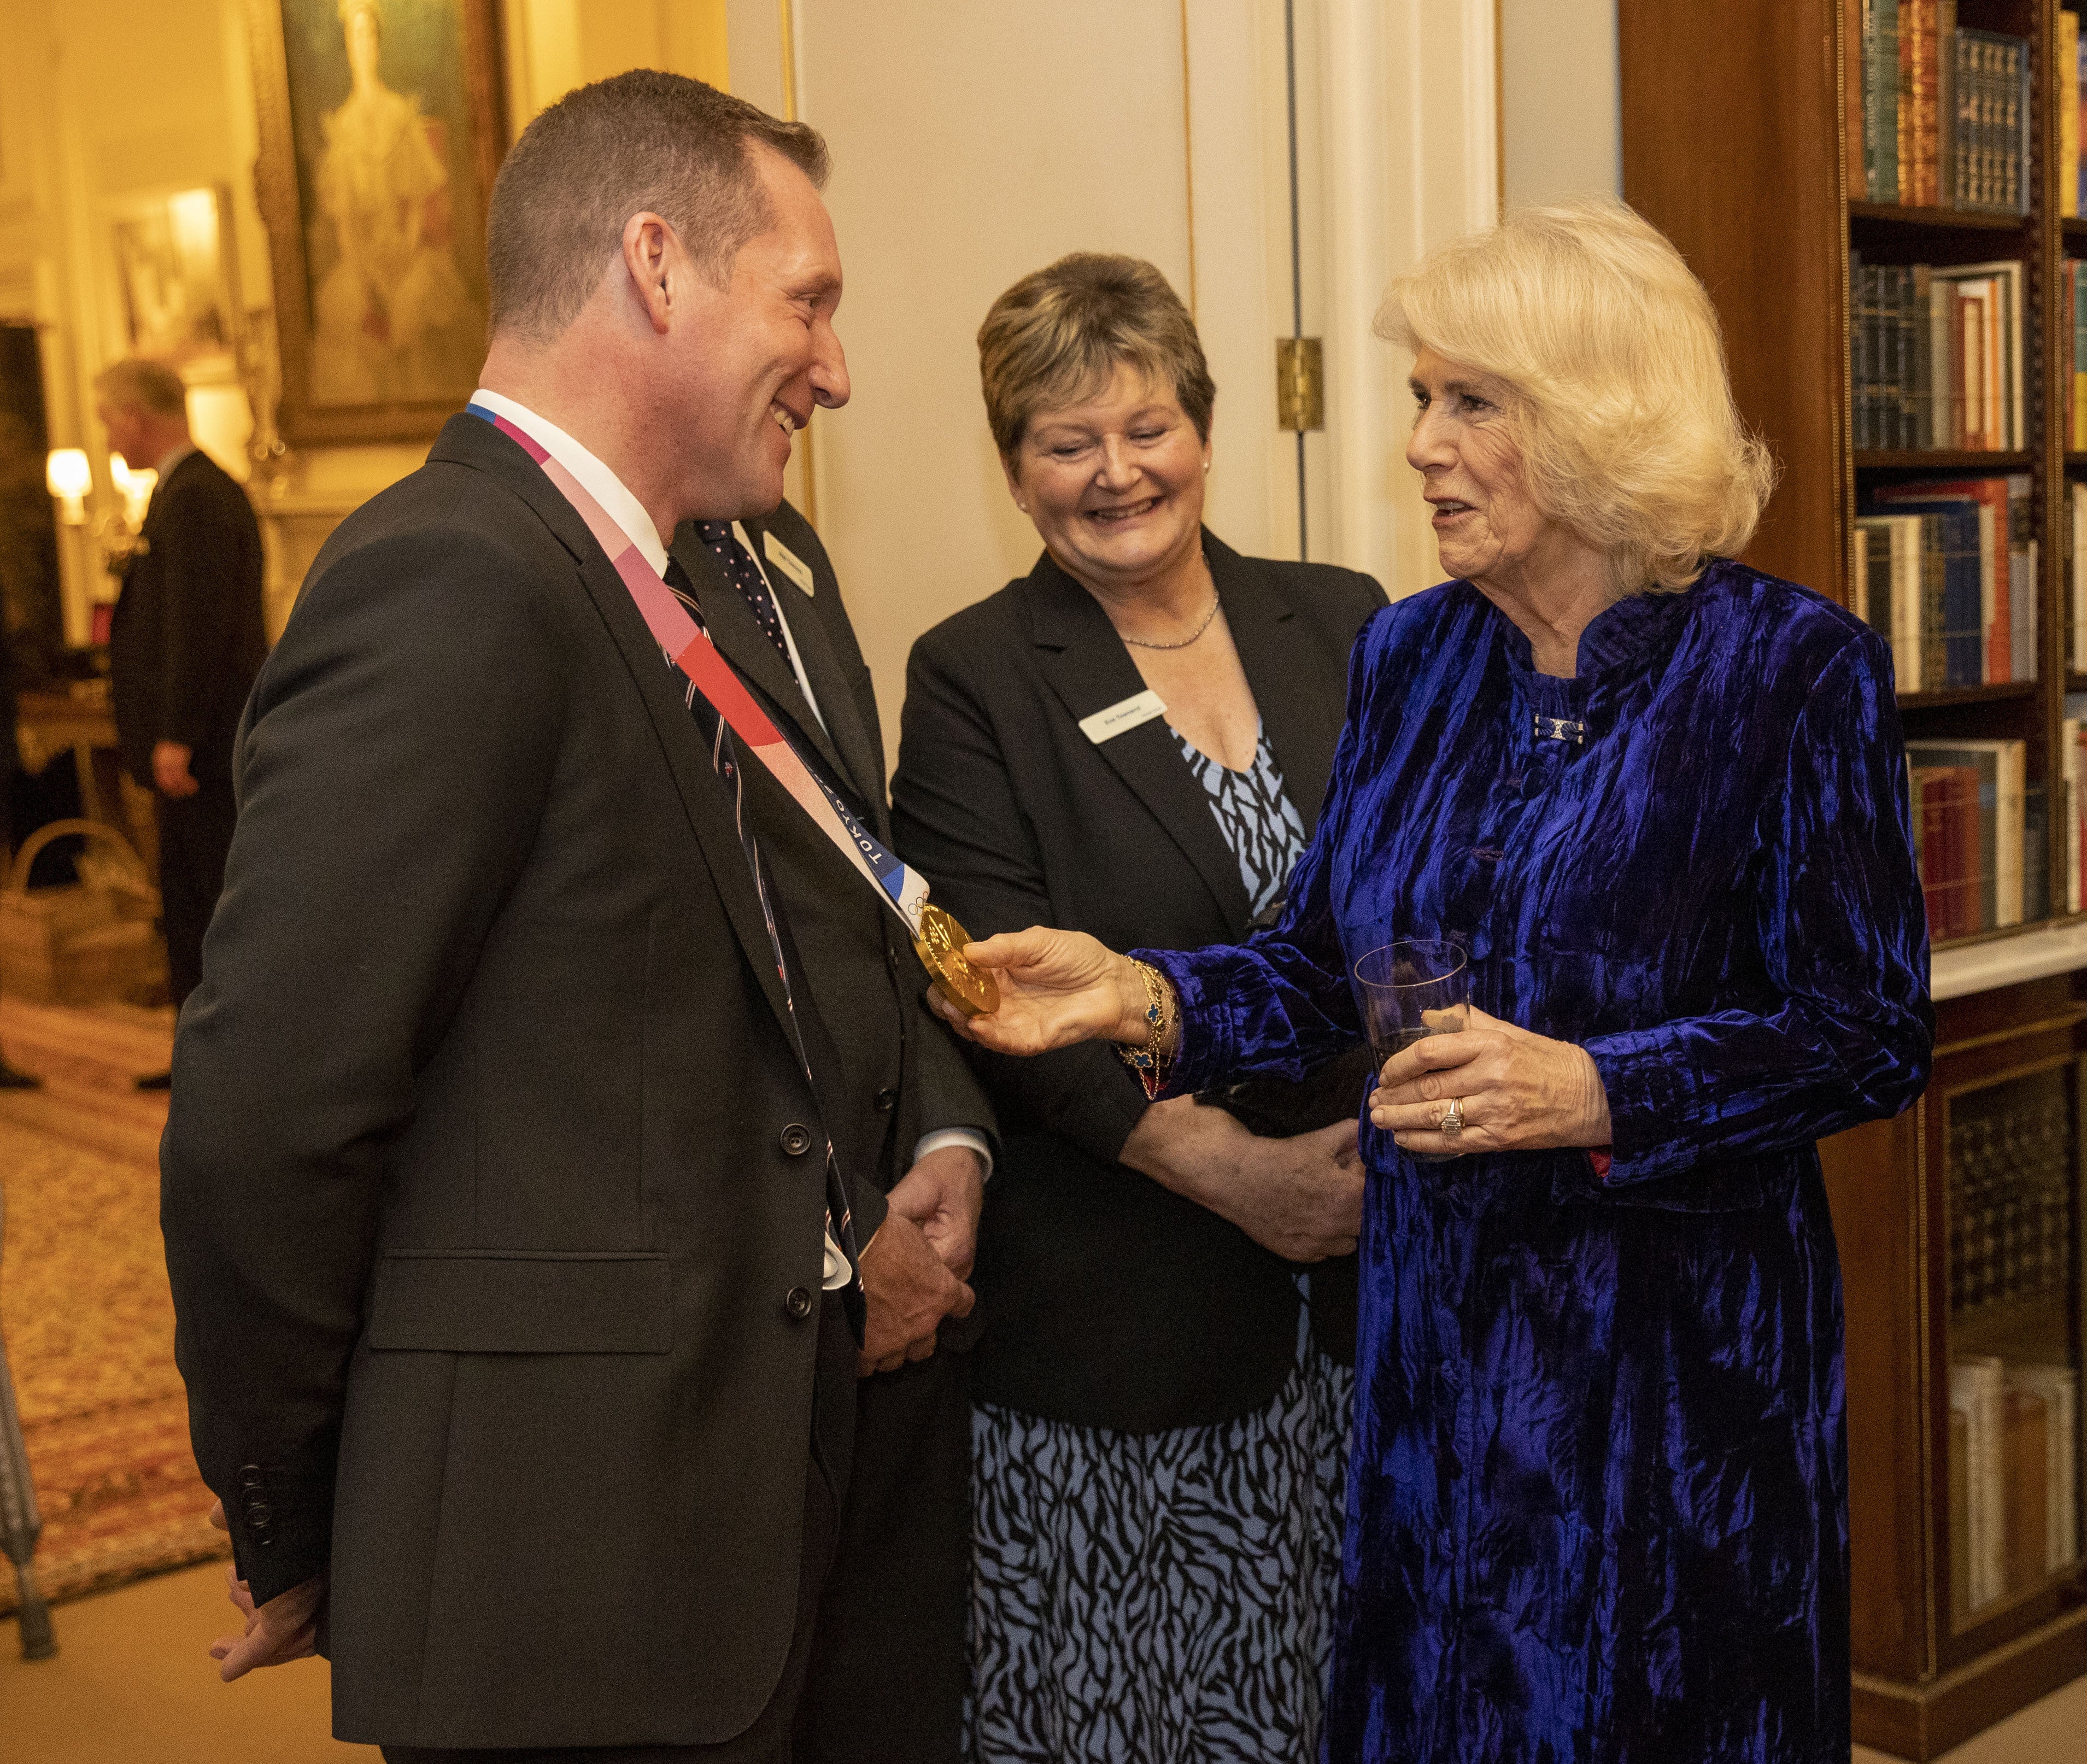 The Duchess of Cornwall talks to gold medallist Oliver Townend (Steve Reigate/Daily Express/PA)